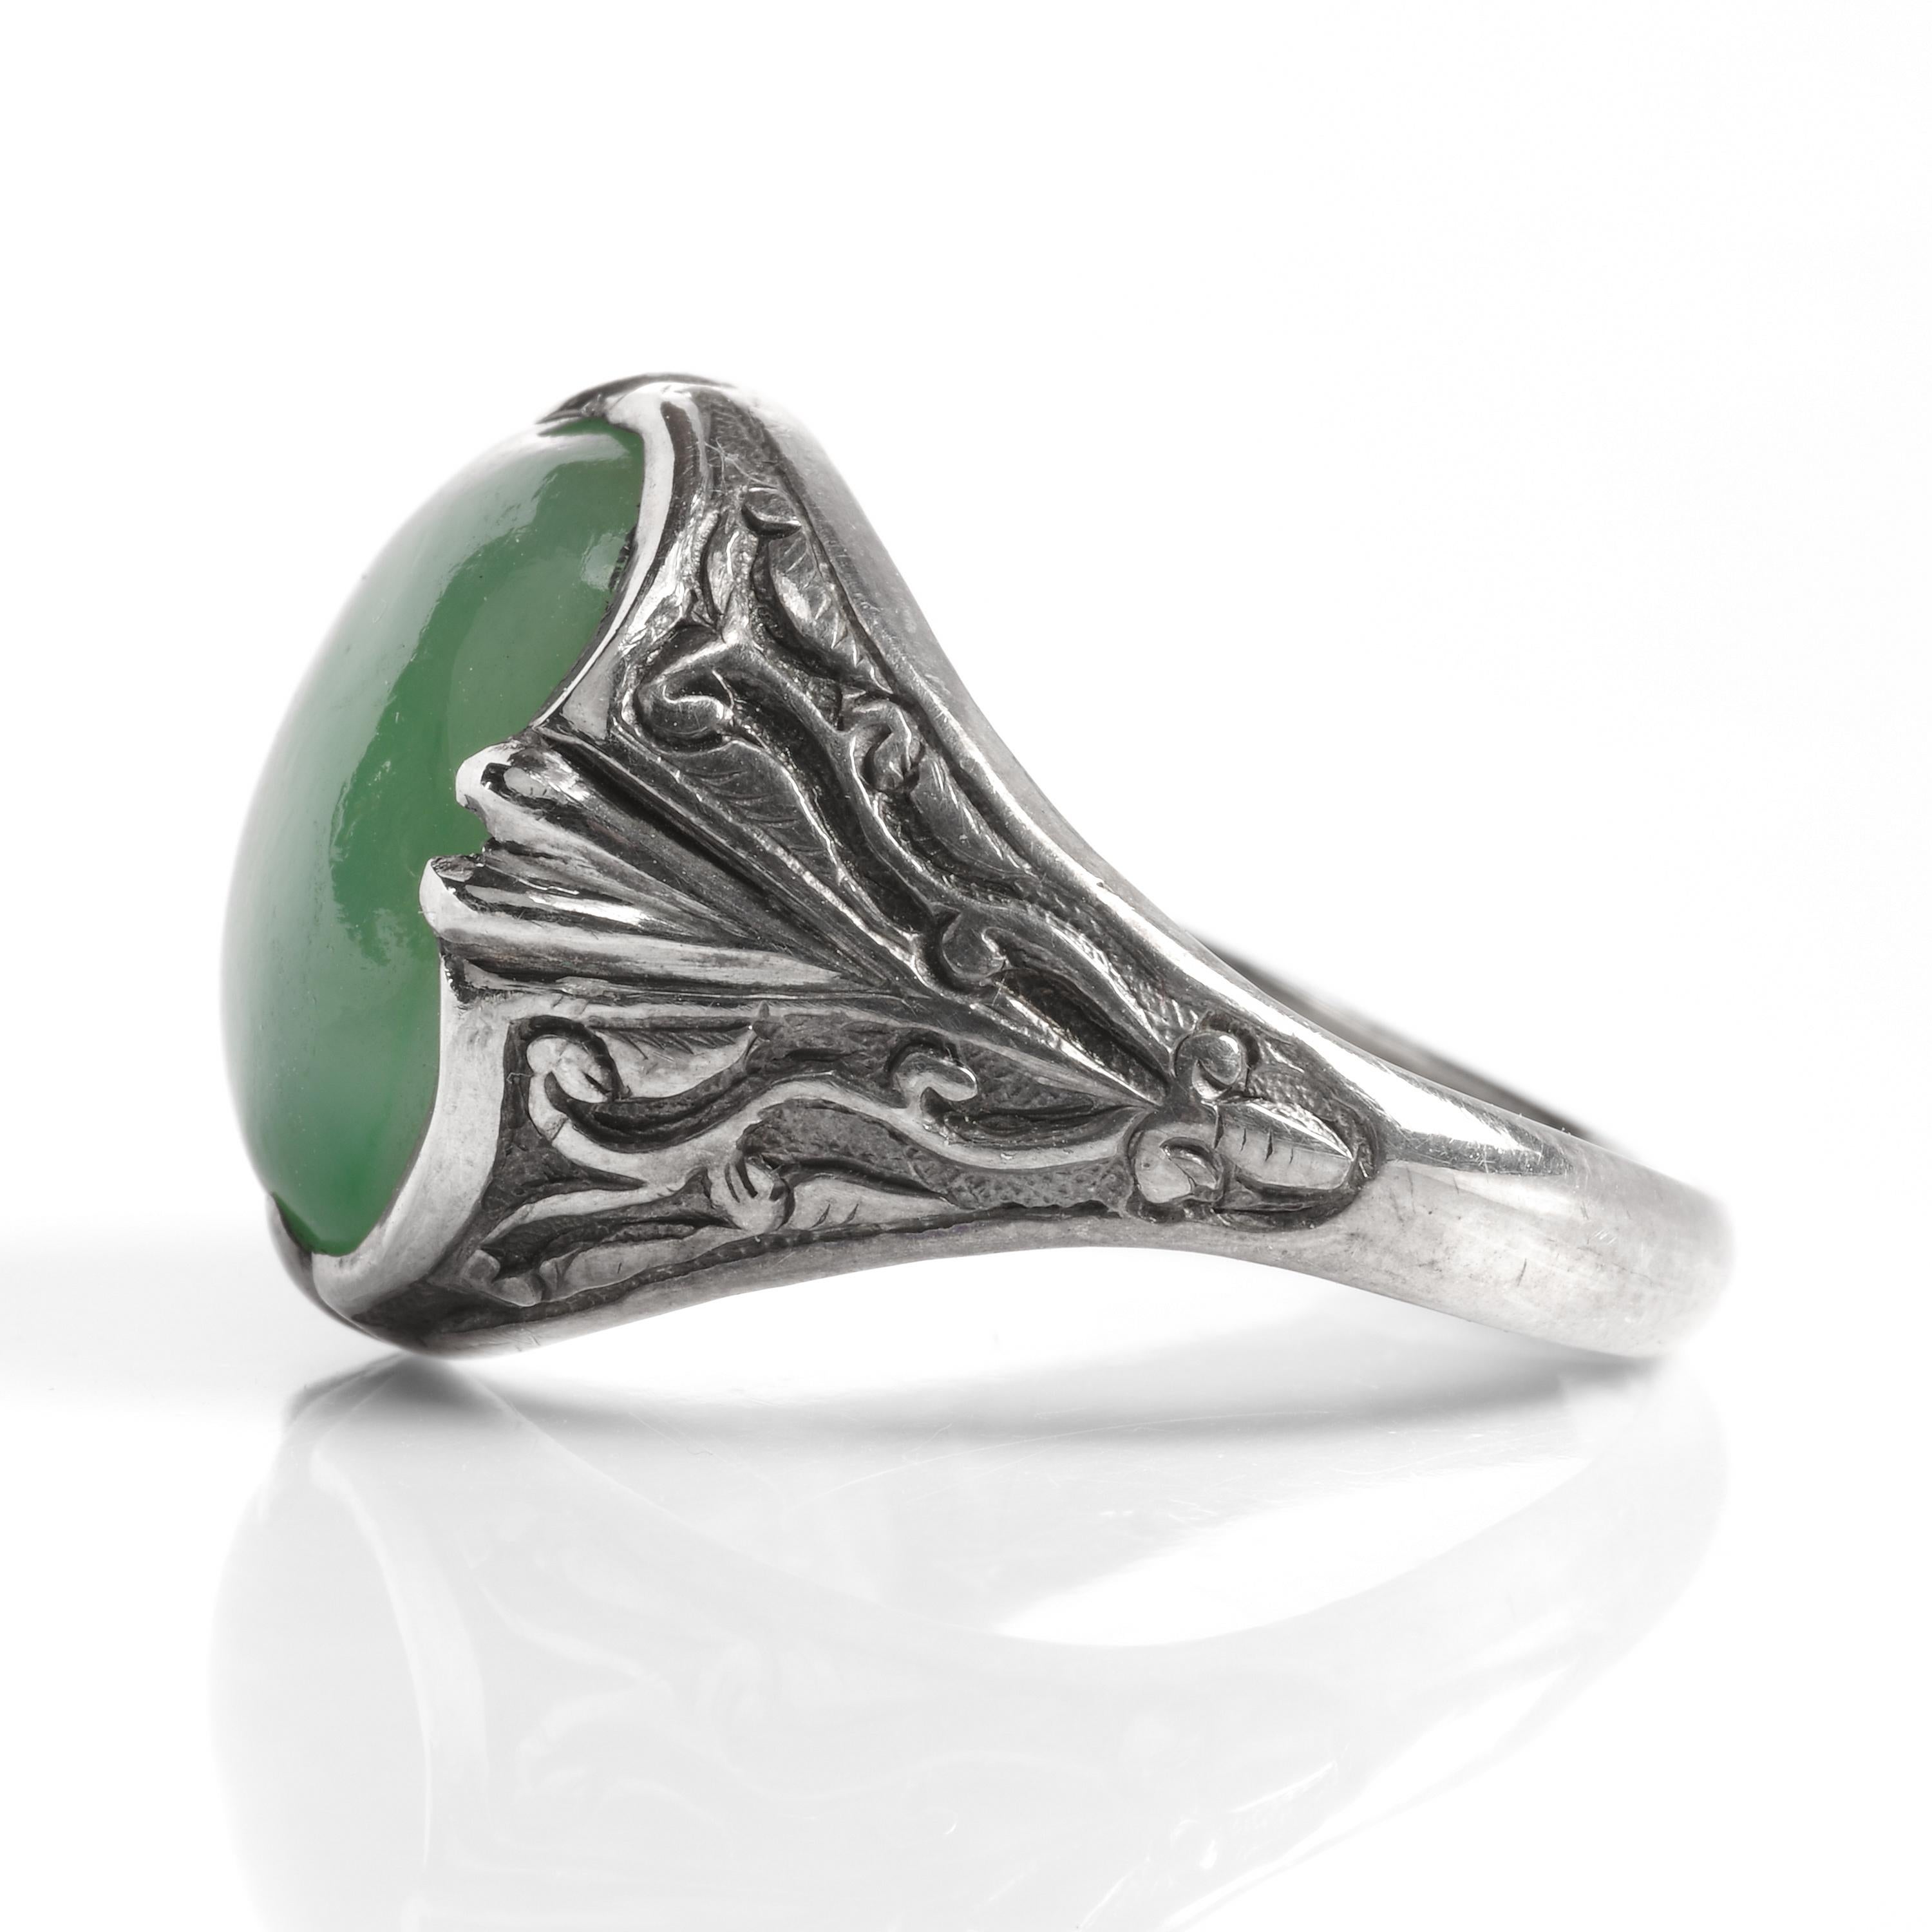 Cabochon Art Nouveau Jade Ring in Silver Certified Untreated